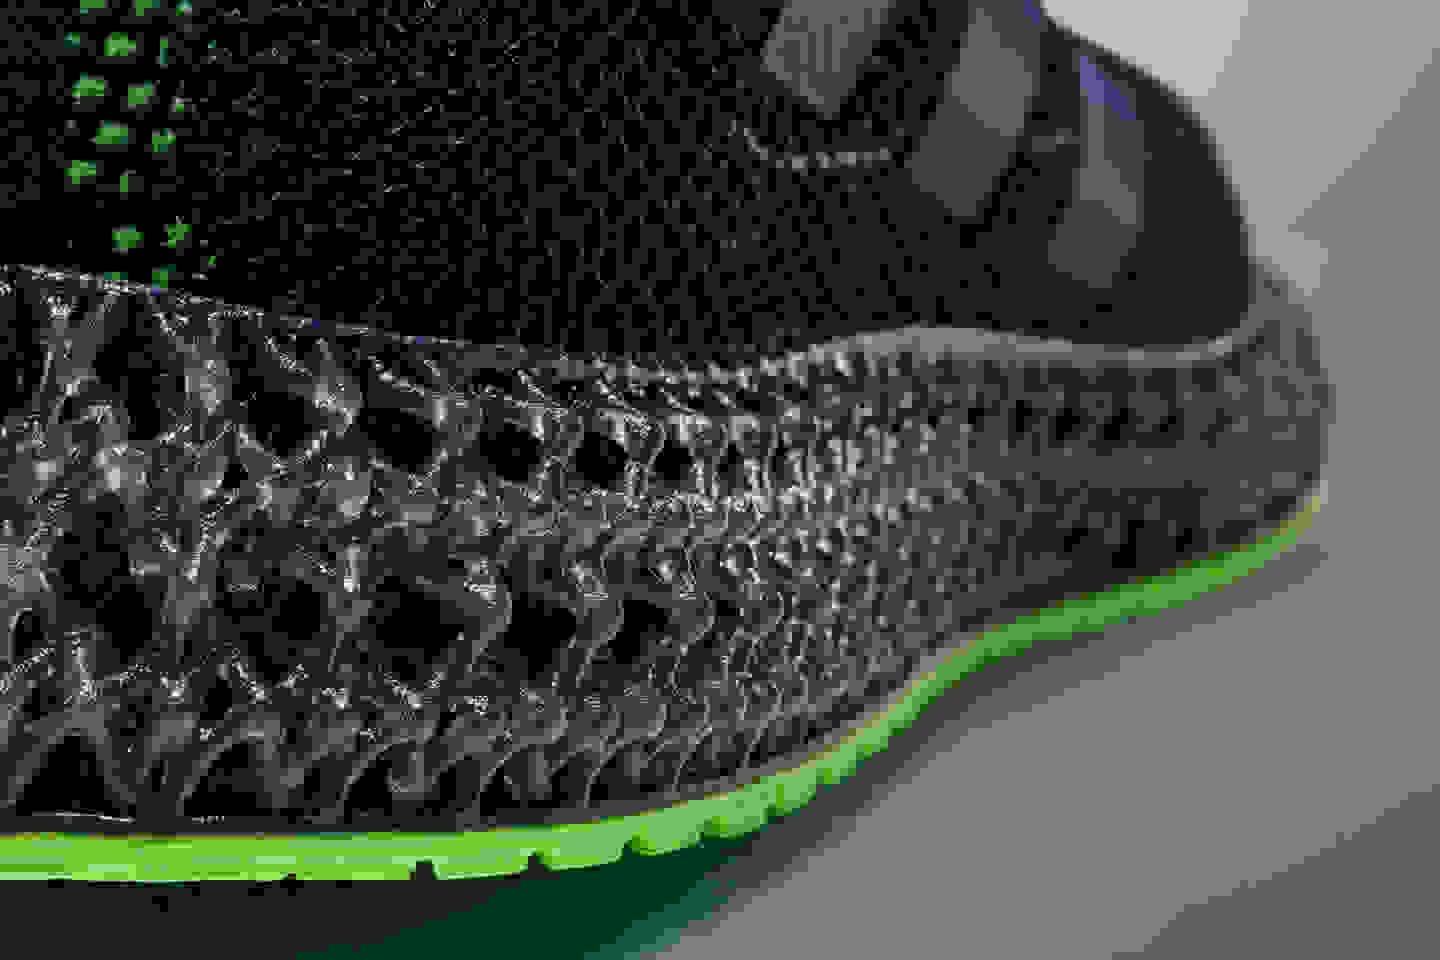 Video explaining the design and technology behind the new adidas 4DFWD running shoe.